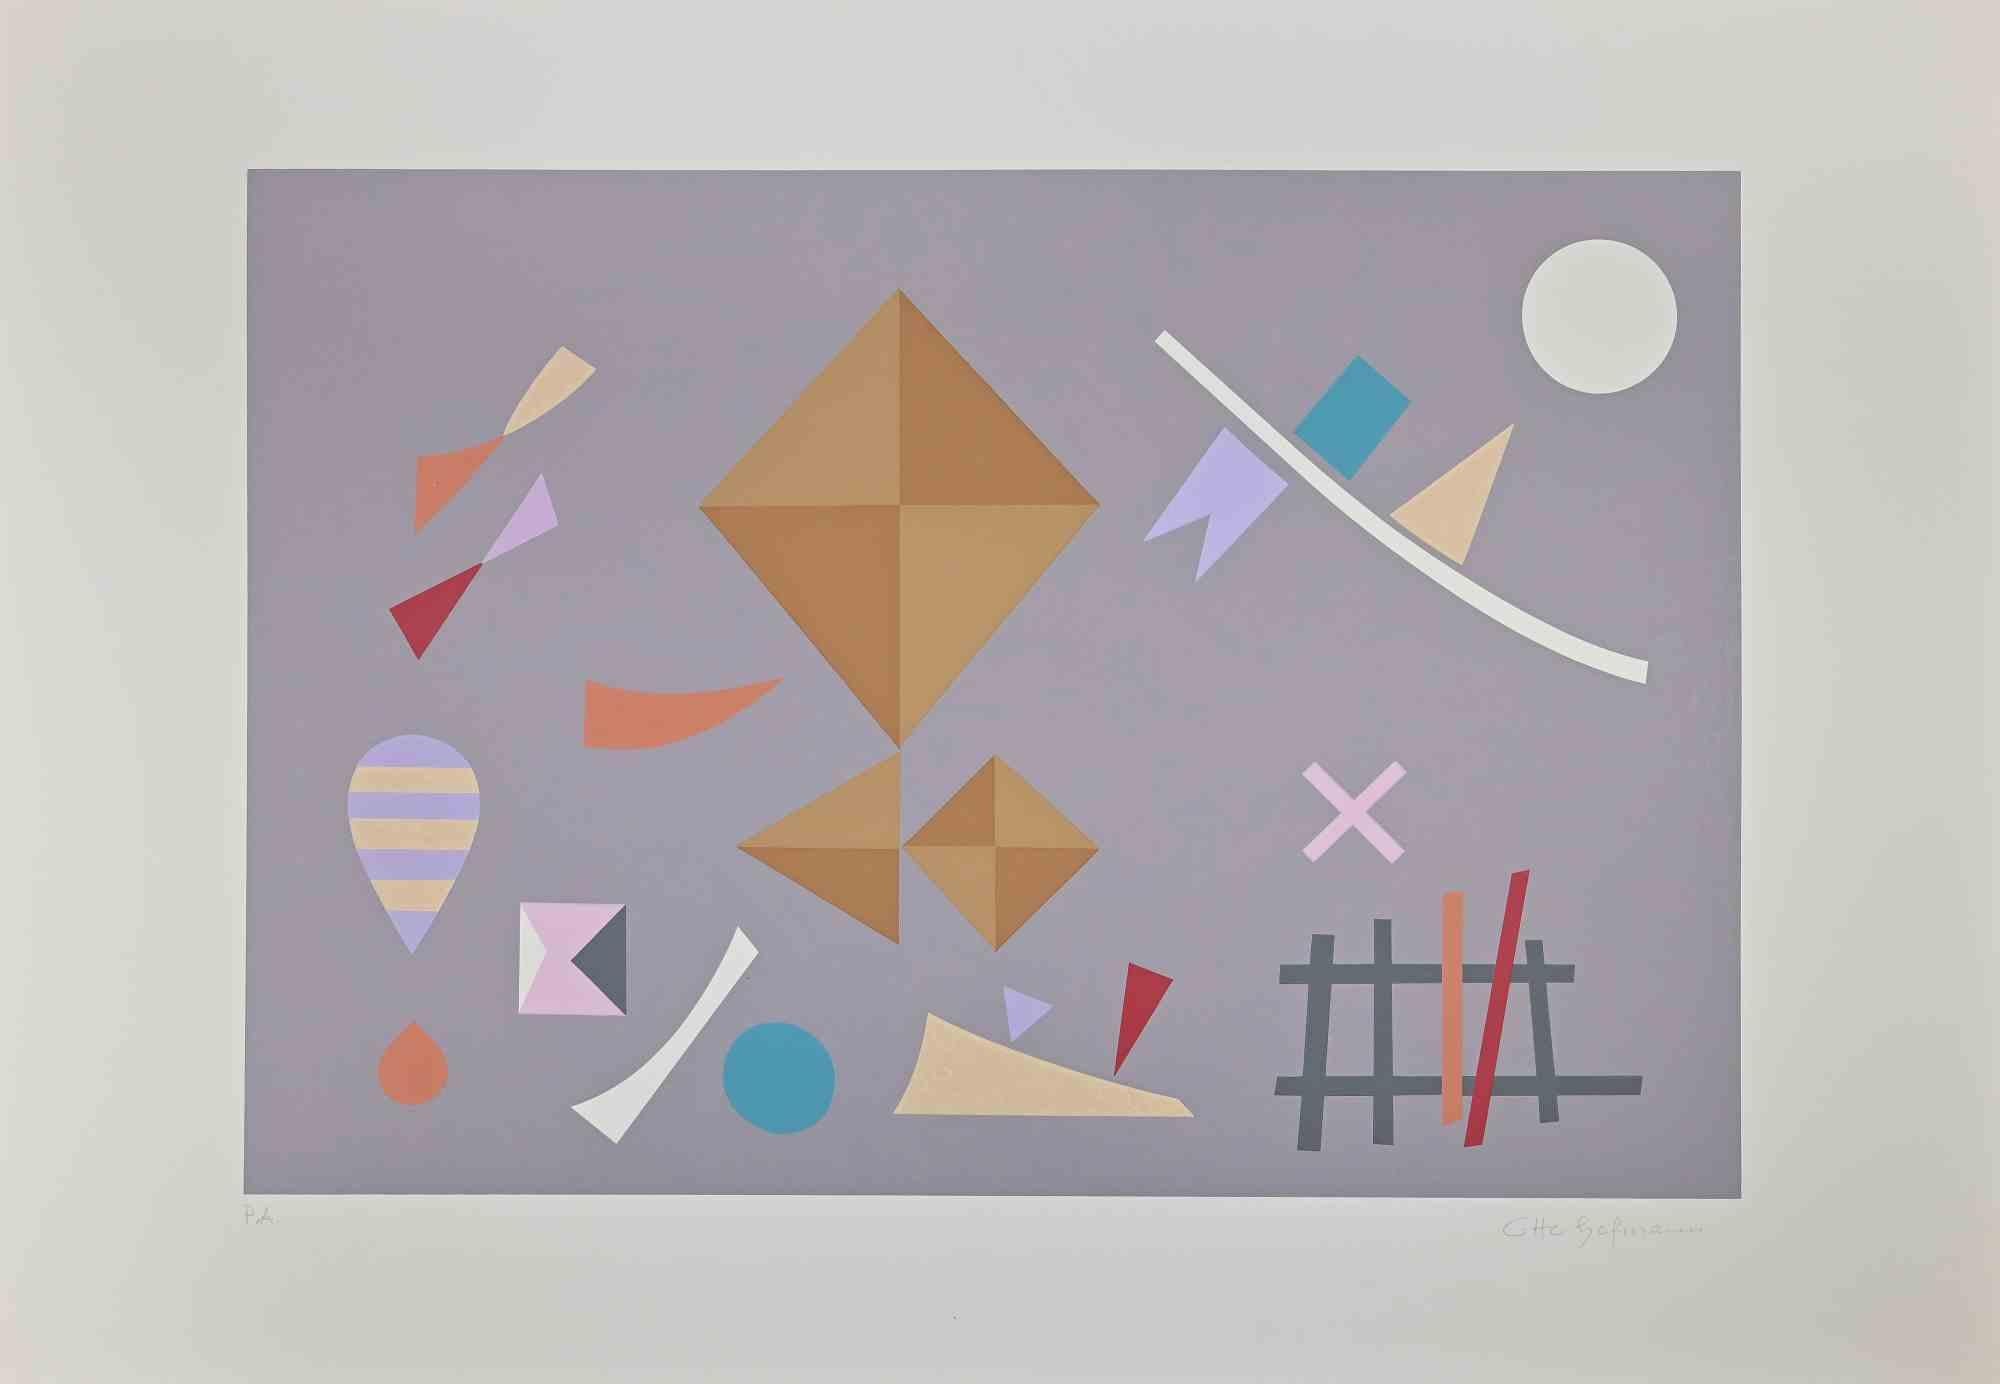 Grey composition is an original contemporary artwork realized by Otto Hofmann in 1989.

Mixed colored screen print.

Hand signed on the lower right margin.

Artist's proof.

The artwork is from a potfolio edited by Edizioni Valente Arte